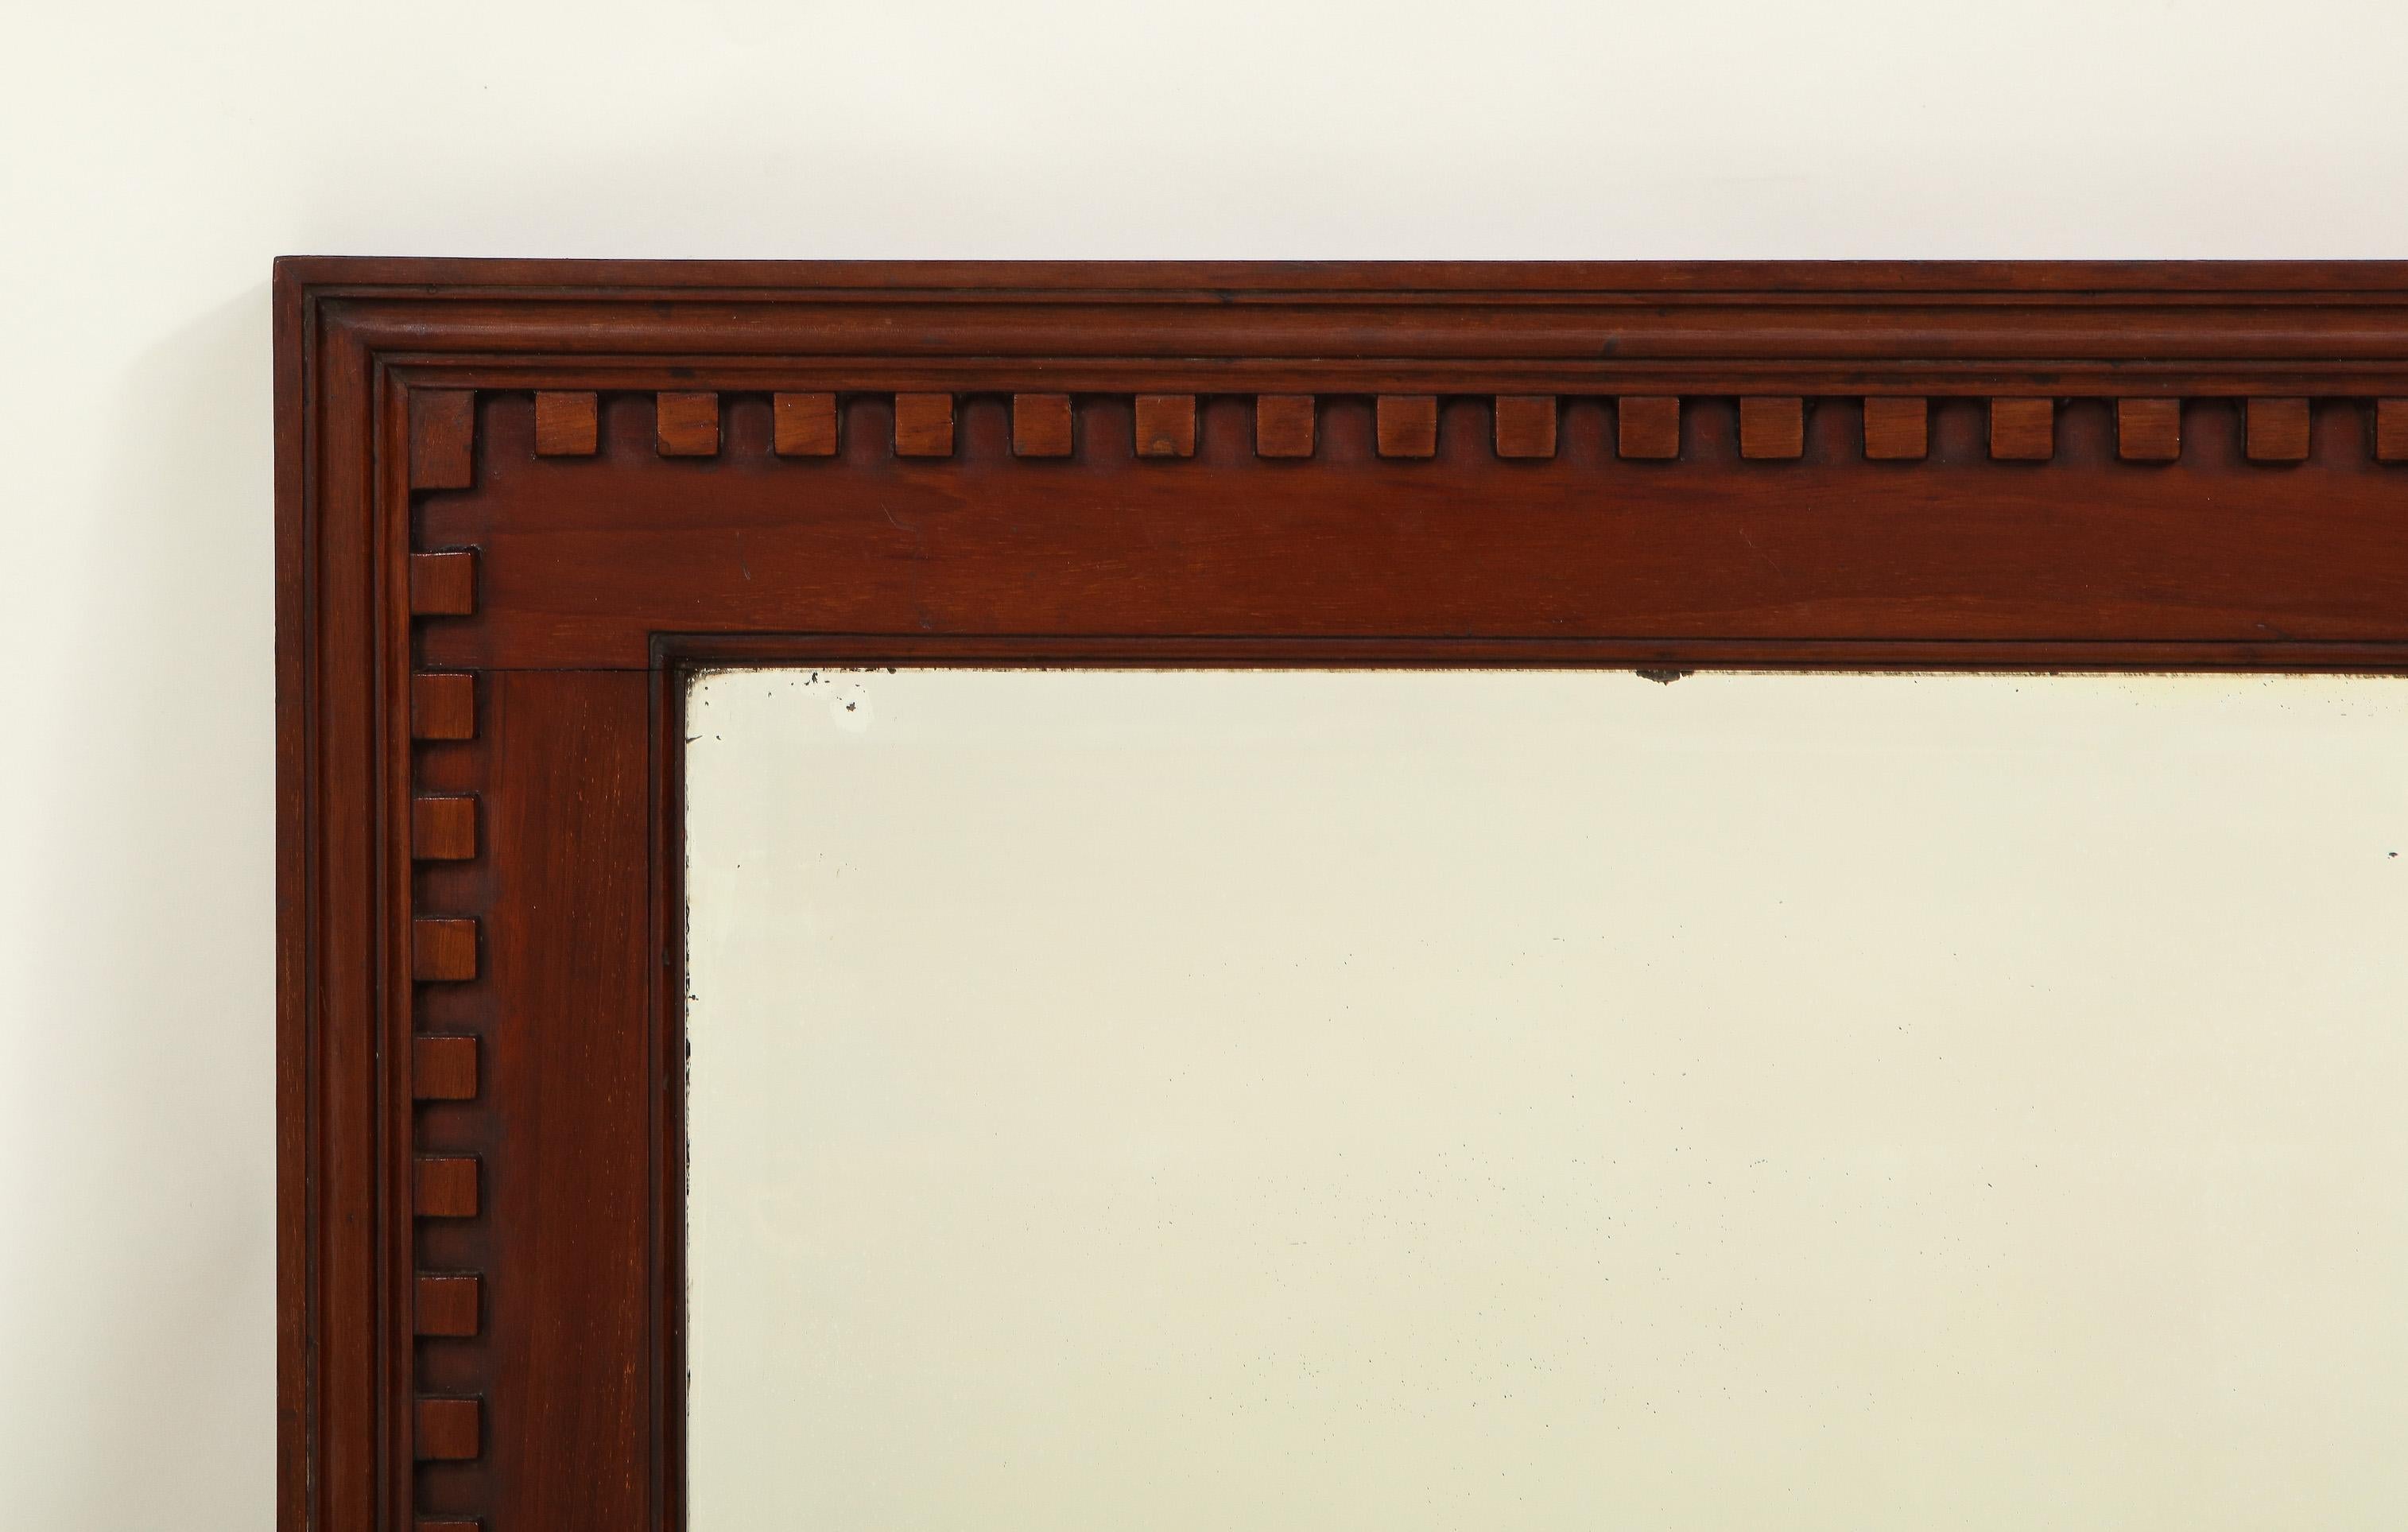 The beveled rectangular mirror plate within a conforming solid mahogany frame, boldly carved with dentil banding. Handsome piece.